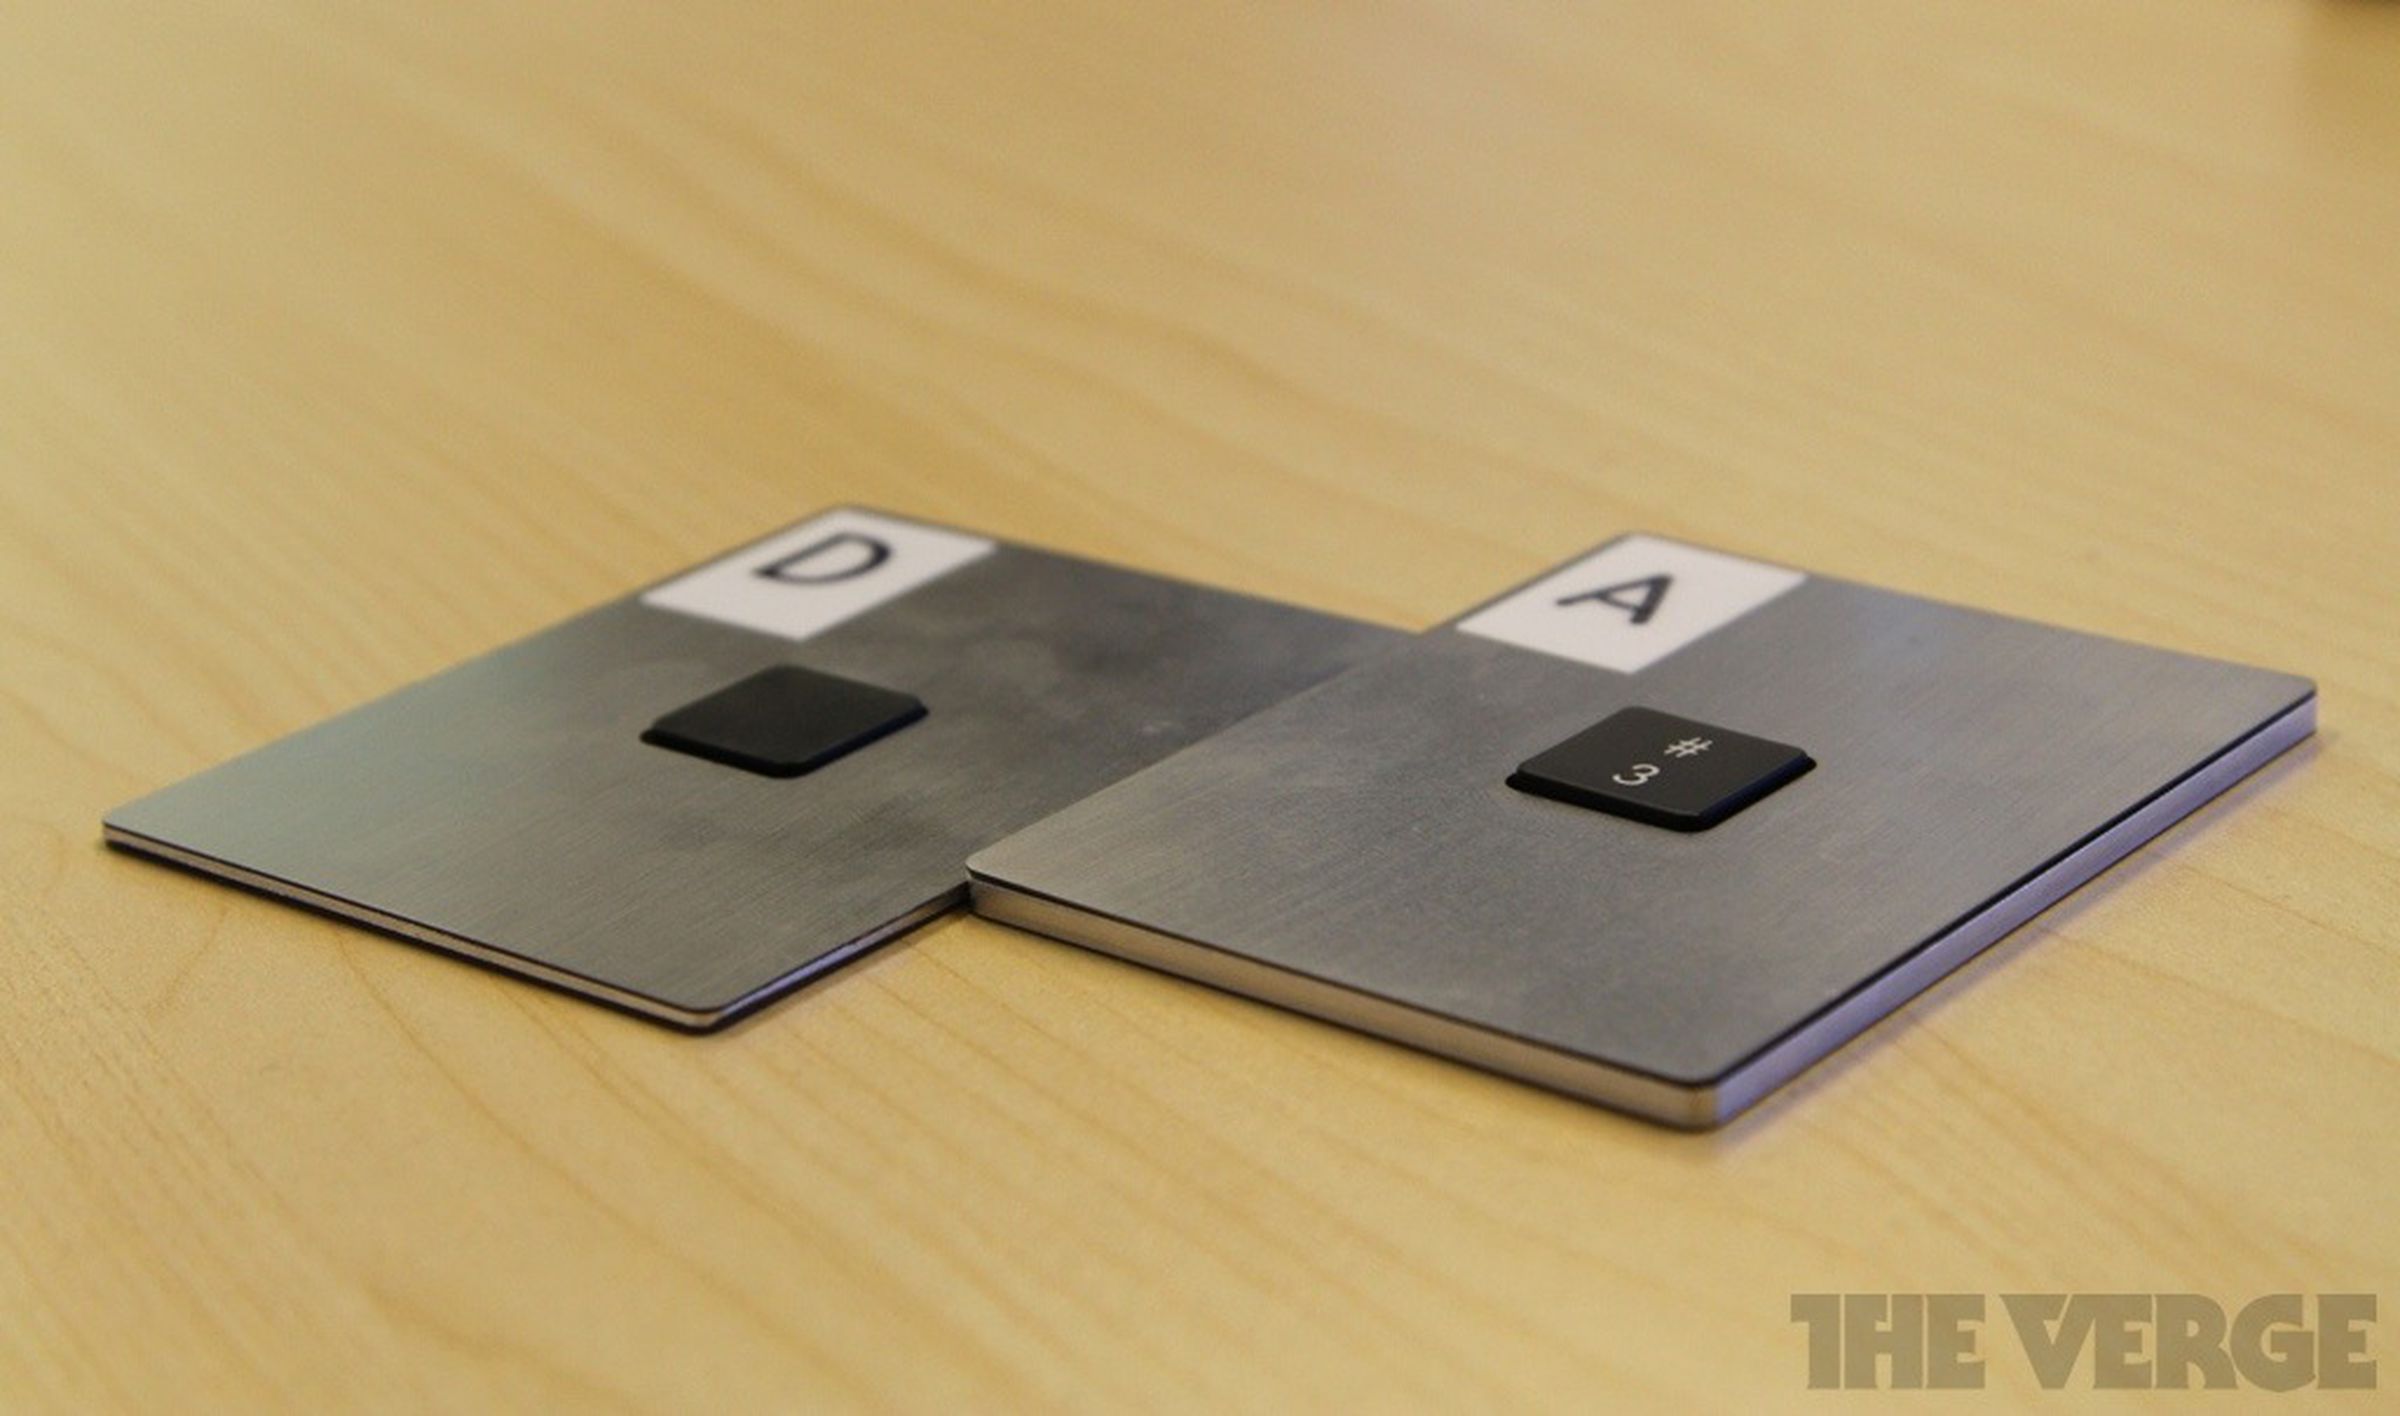 Synaptics ThinTouch hands-on pictures